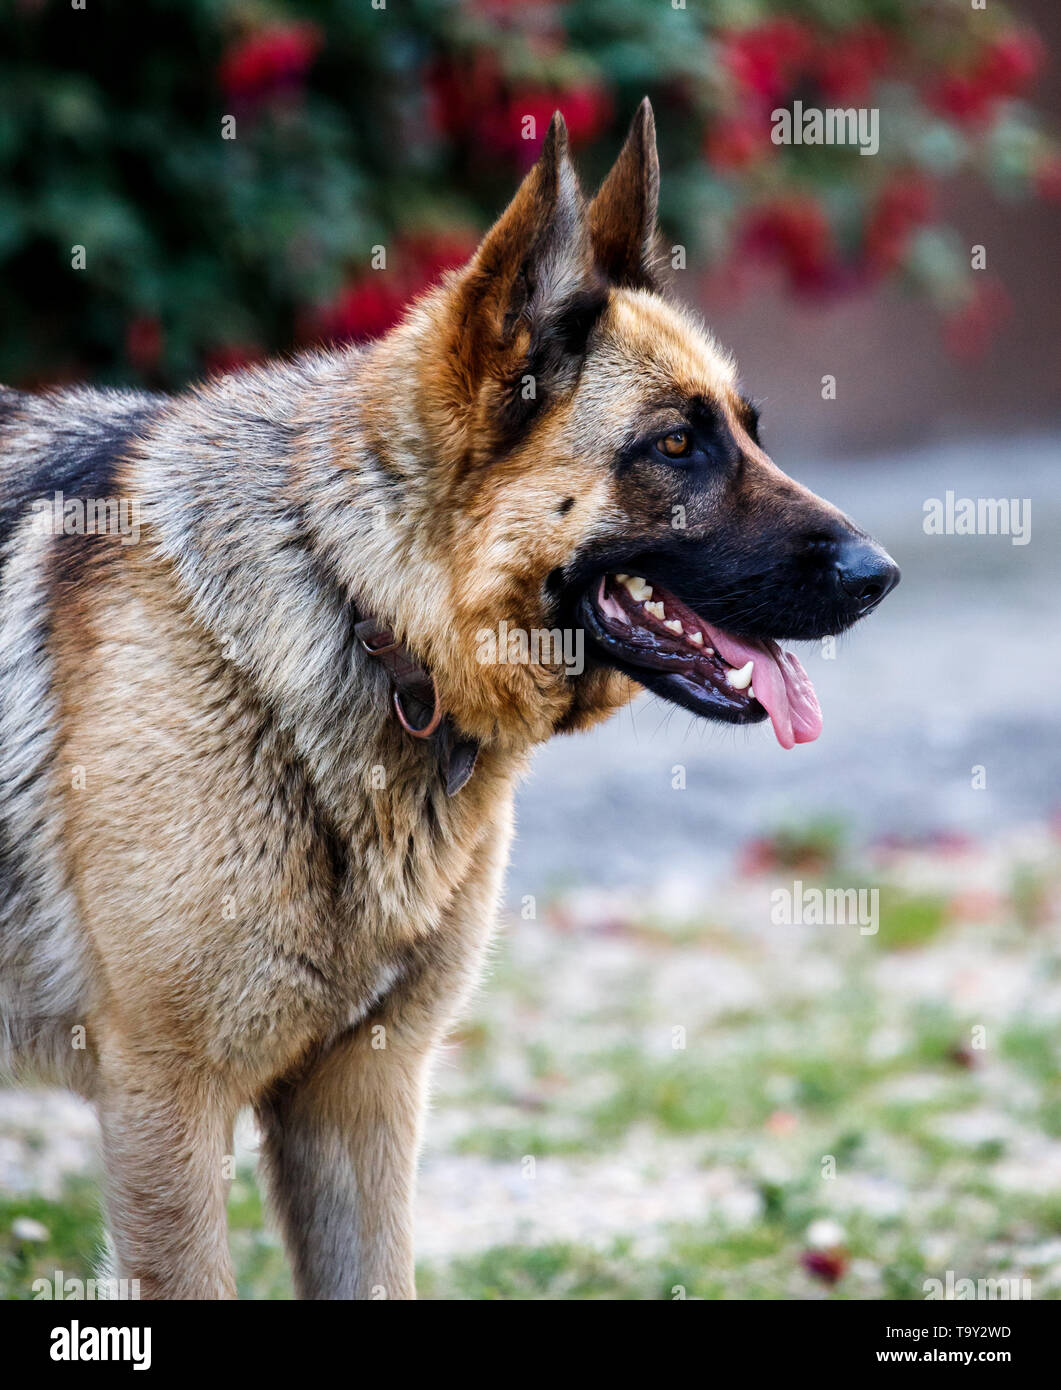 faithful family member dog looking pride to its human pack and spreading happiness Stock Photo